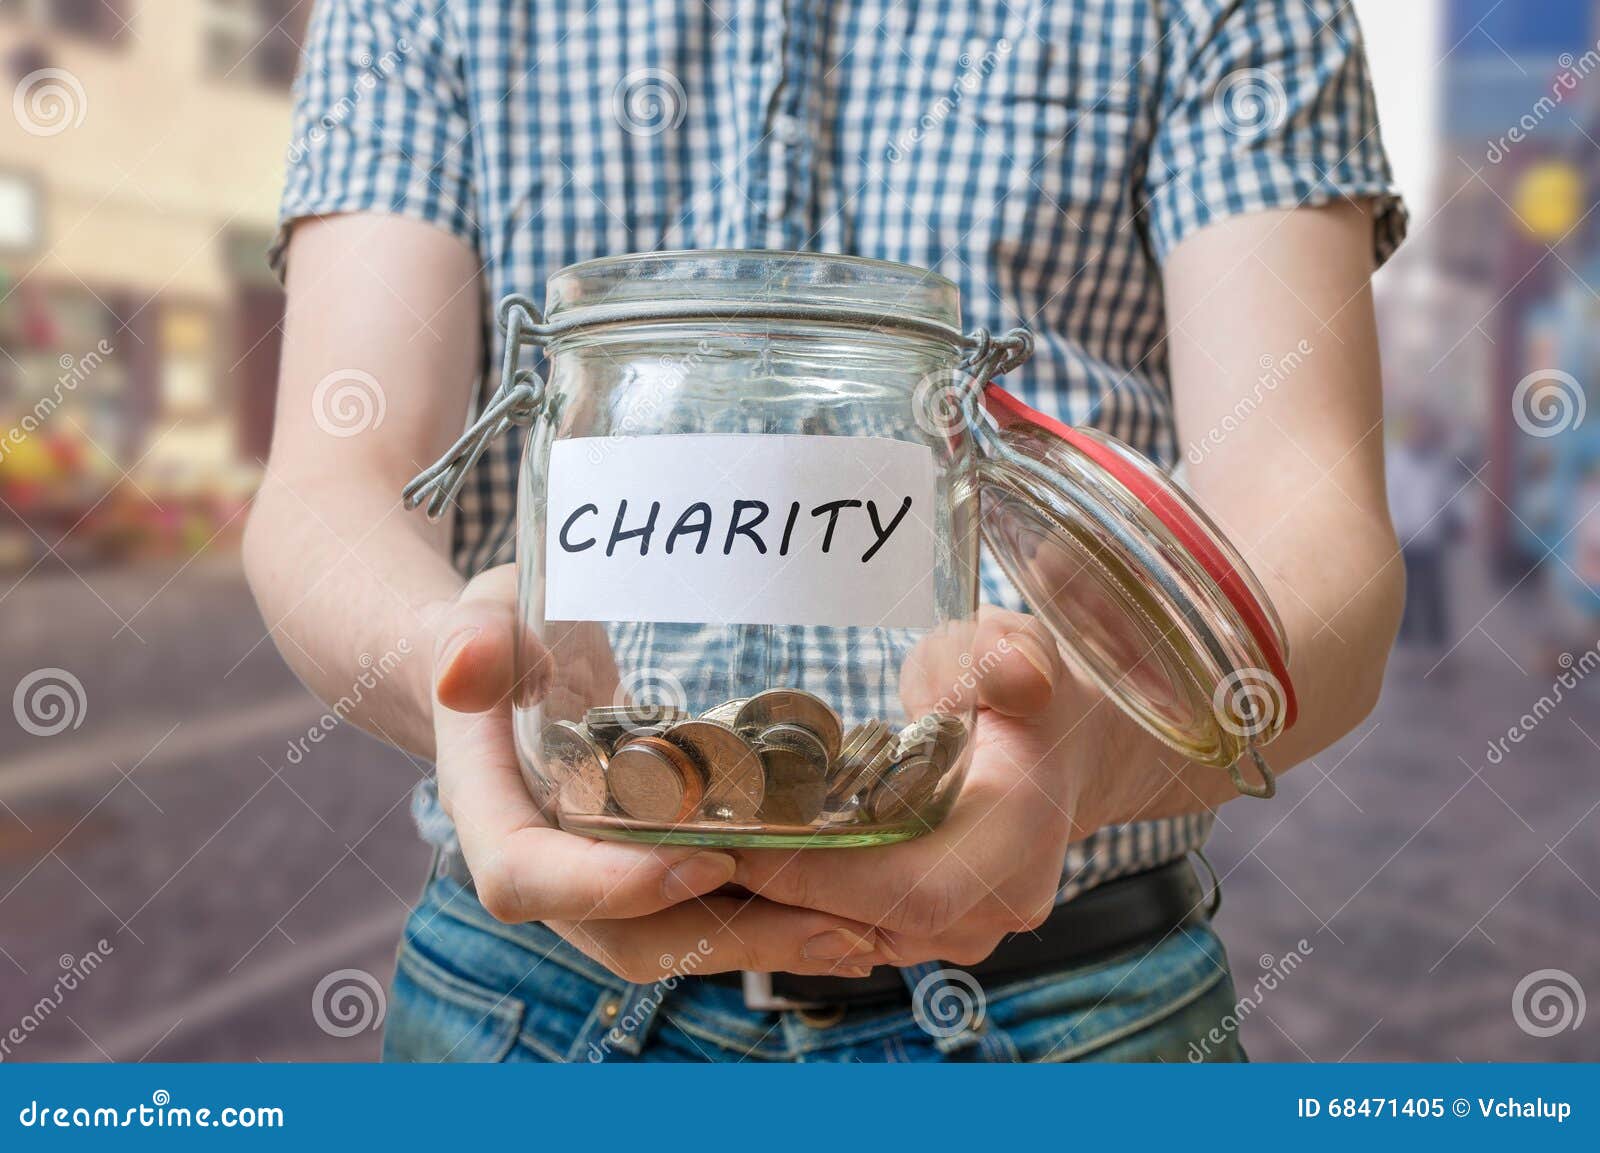 man standing on street is collecting money for charity and holds jar